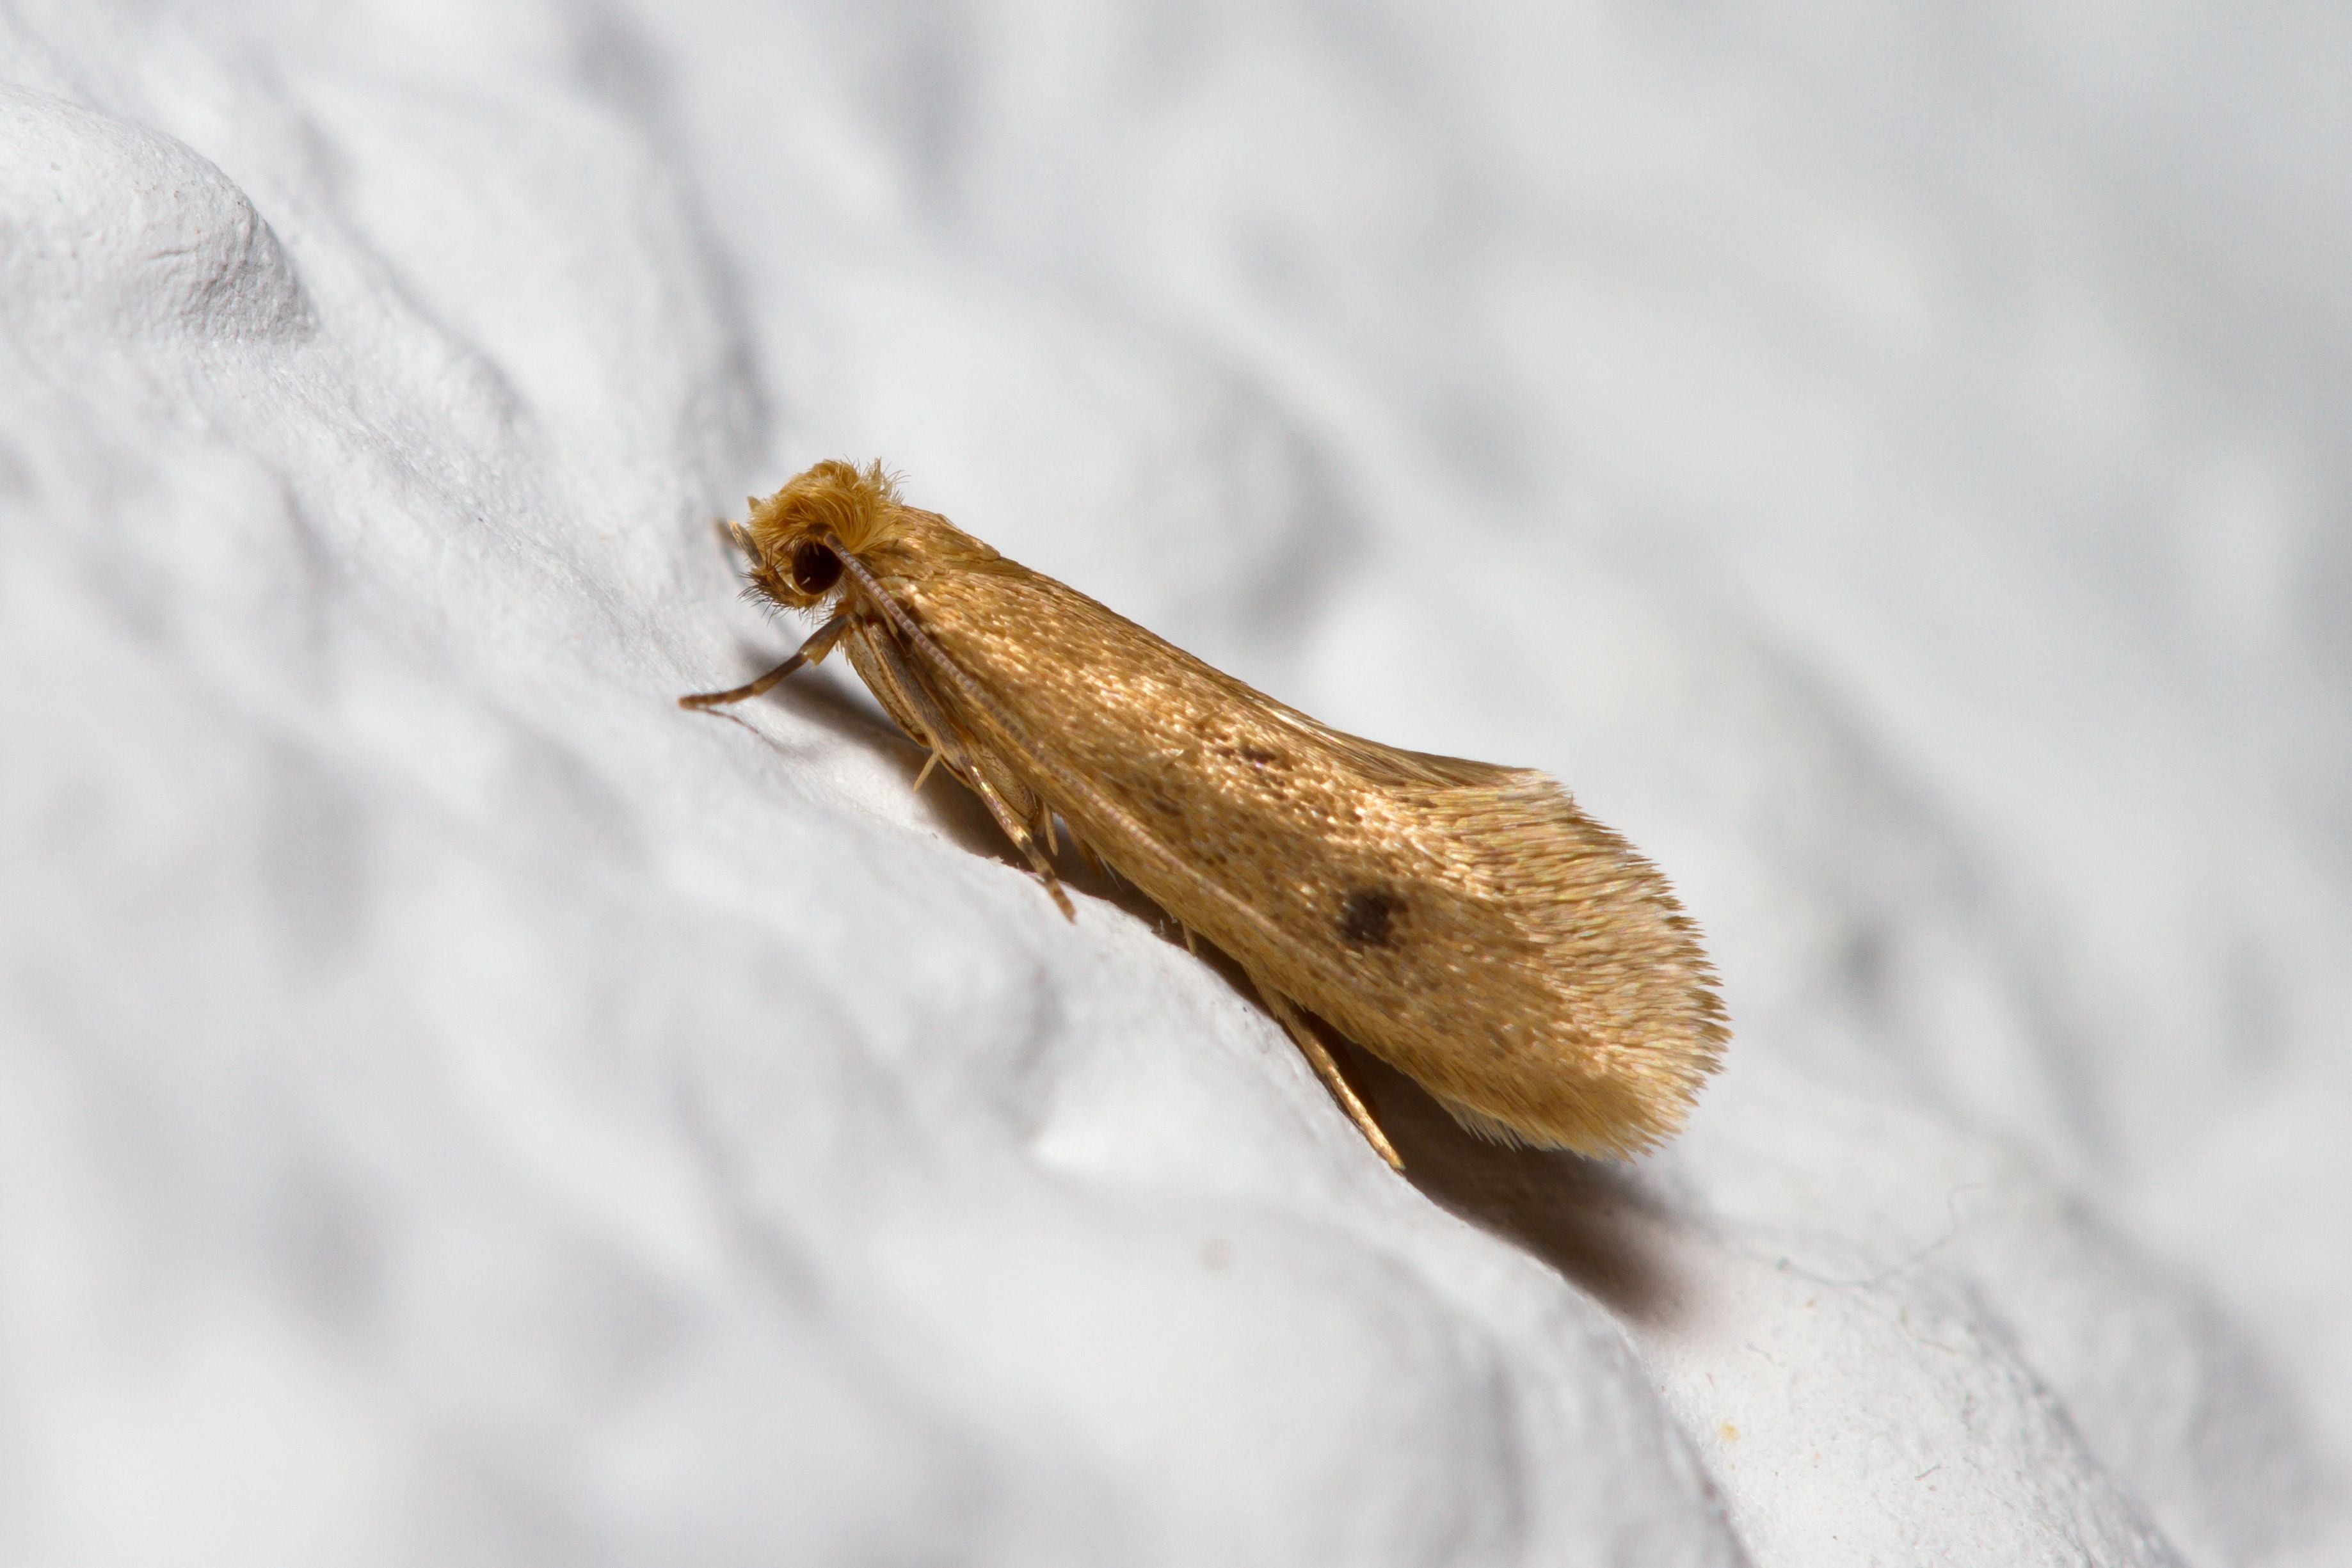 The Moth Cycle of Clothes and Carpet Moths